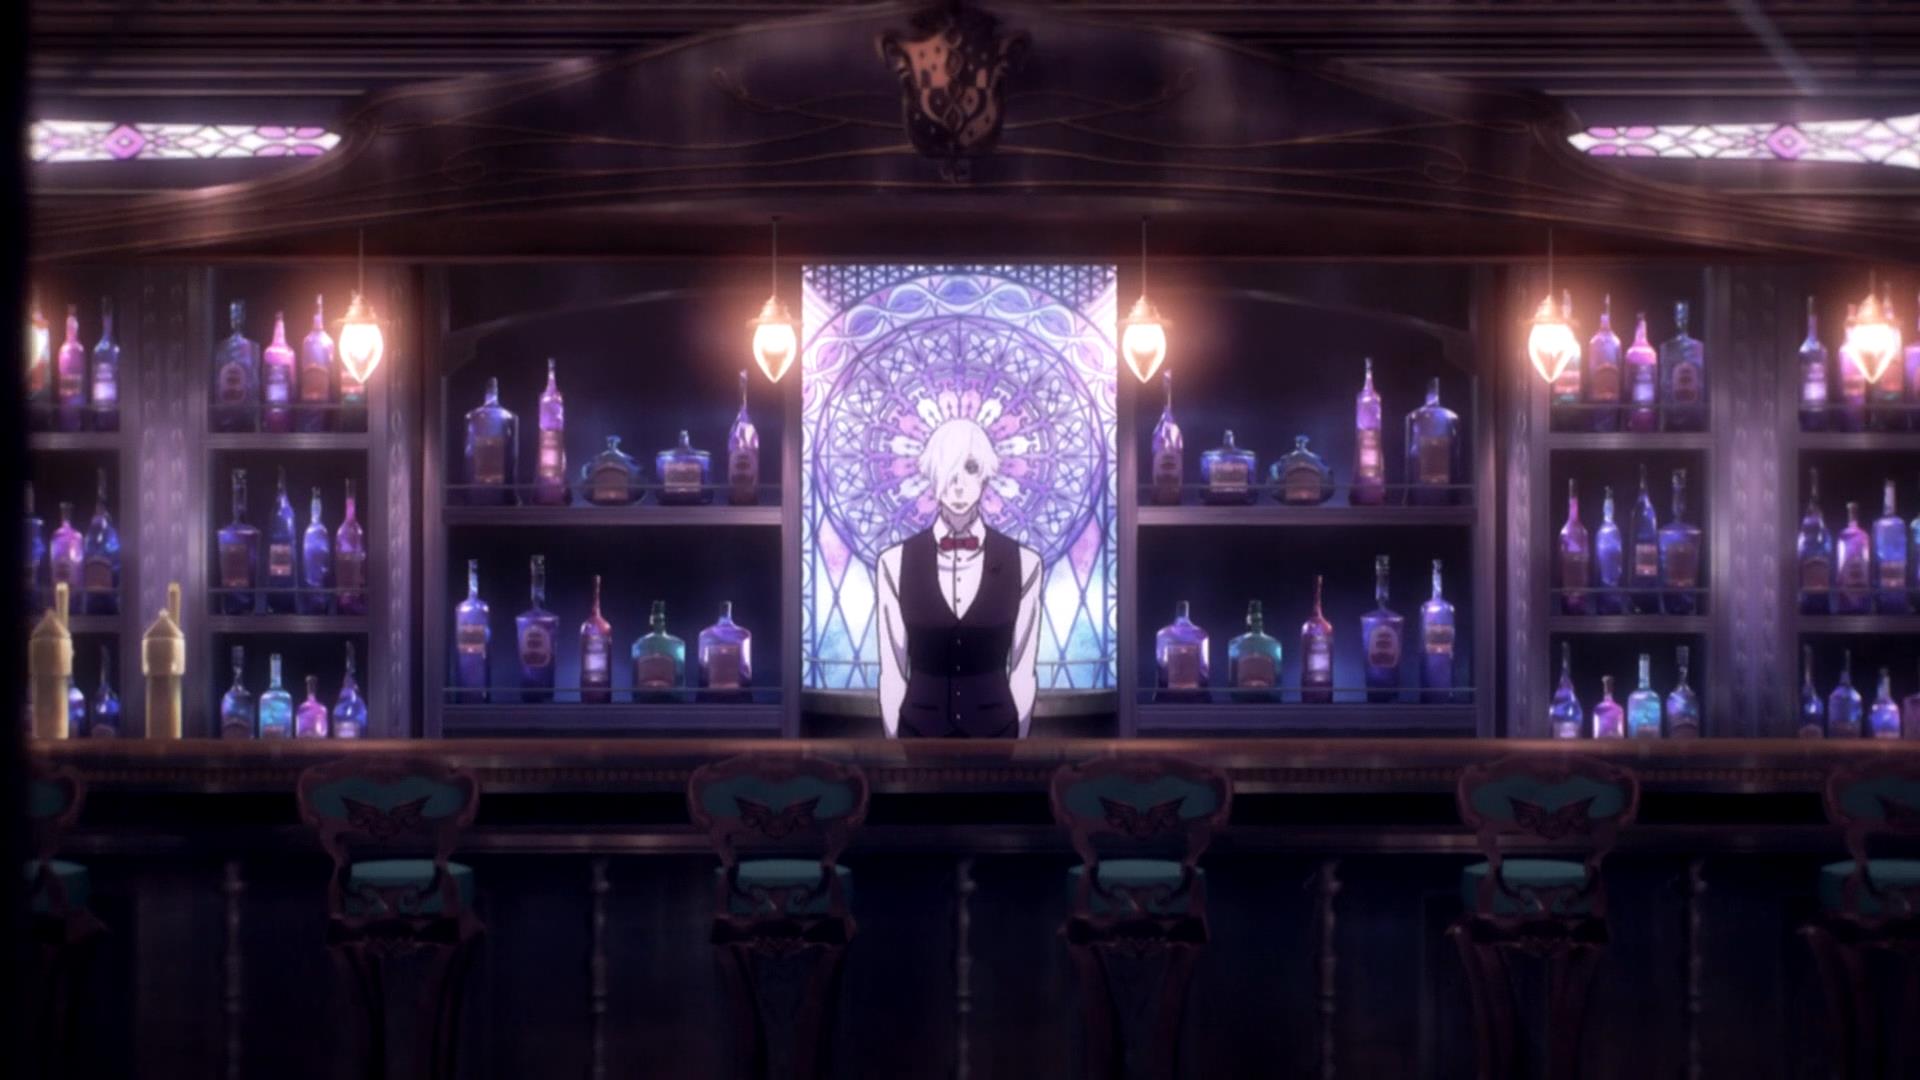 Anime Death Parade HD Wallpaper | Background Image